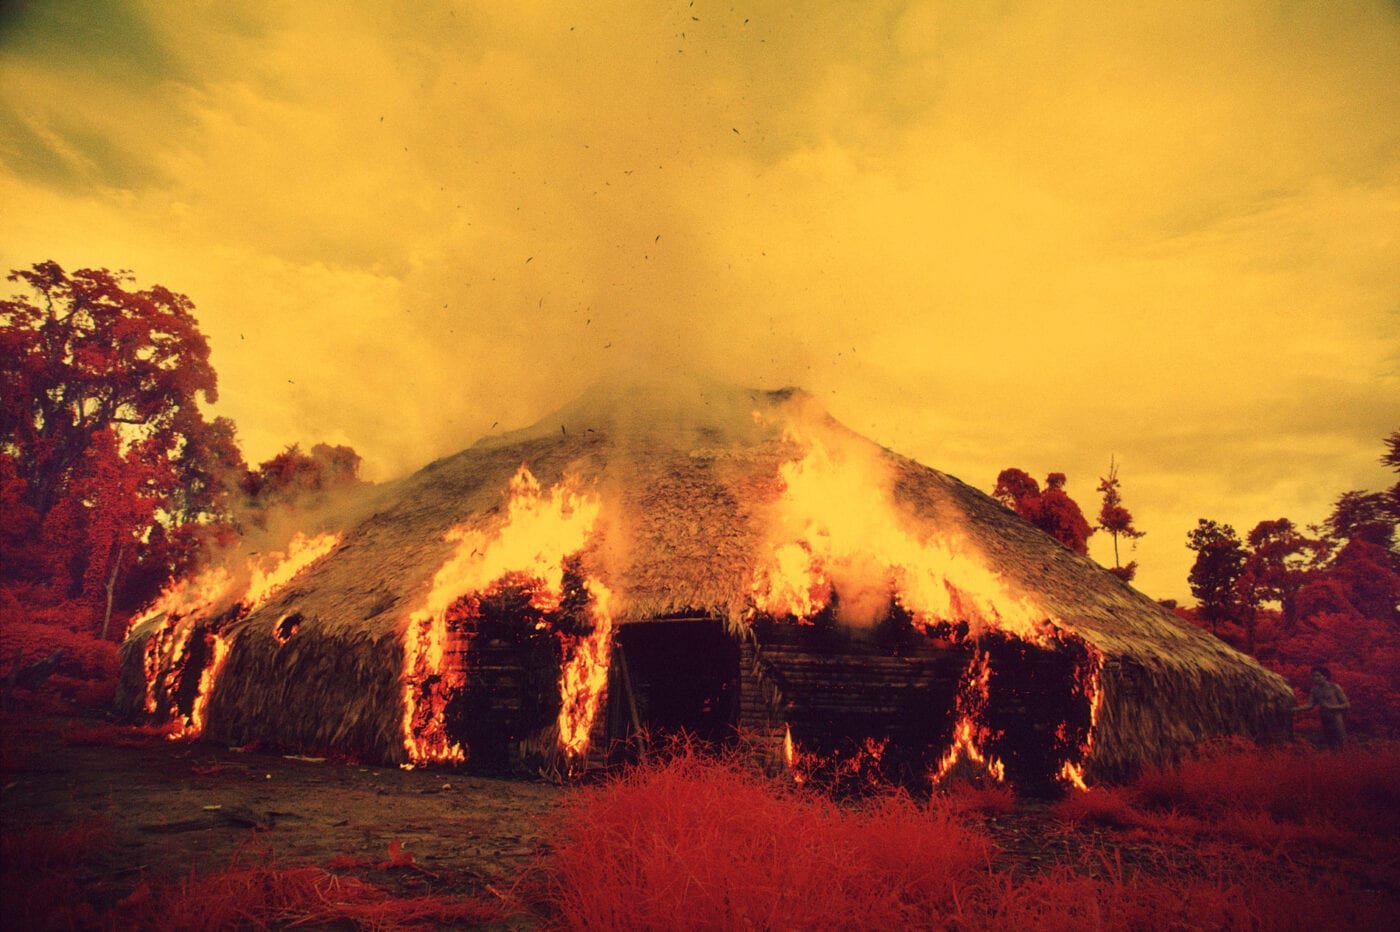 The Yanomami often burn down their yano [collective house] when they migrate, when they want to escape from an epidemic, or when an important leader dies. Catrimani, 1972-76. Infrared film. © Claudia Andujar 